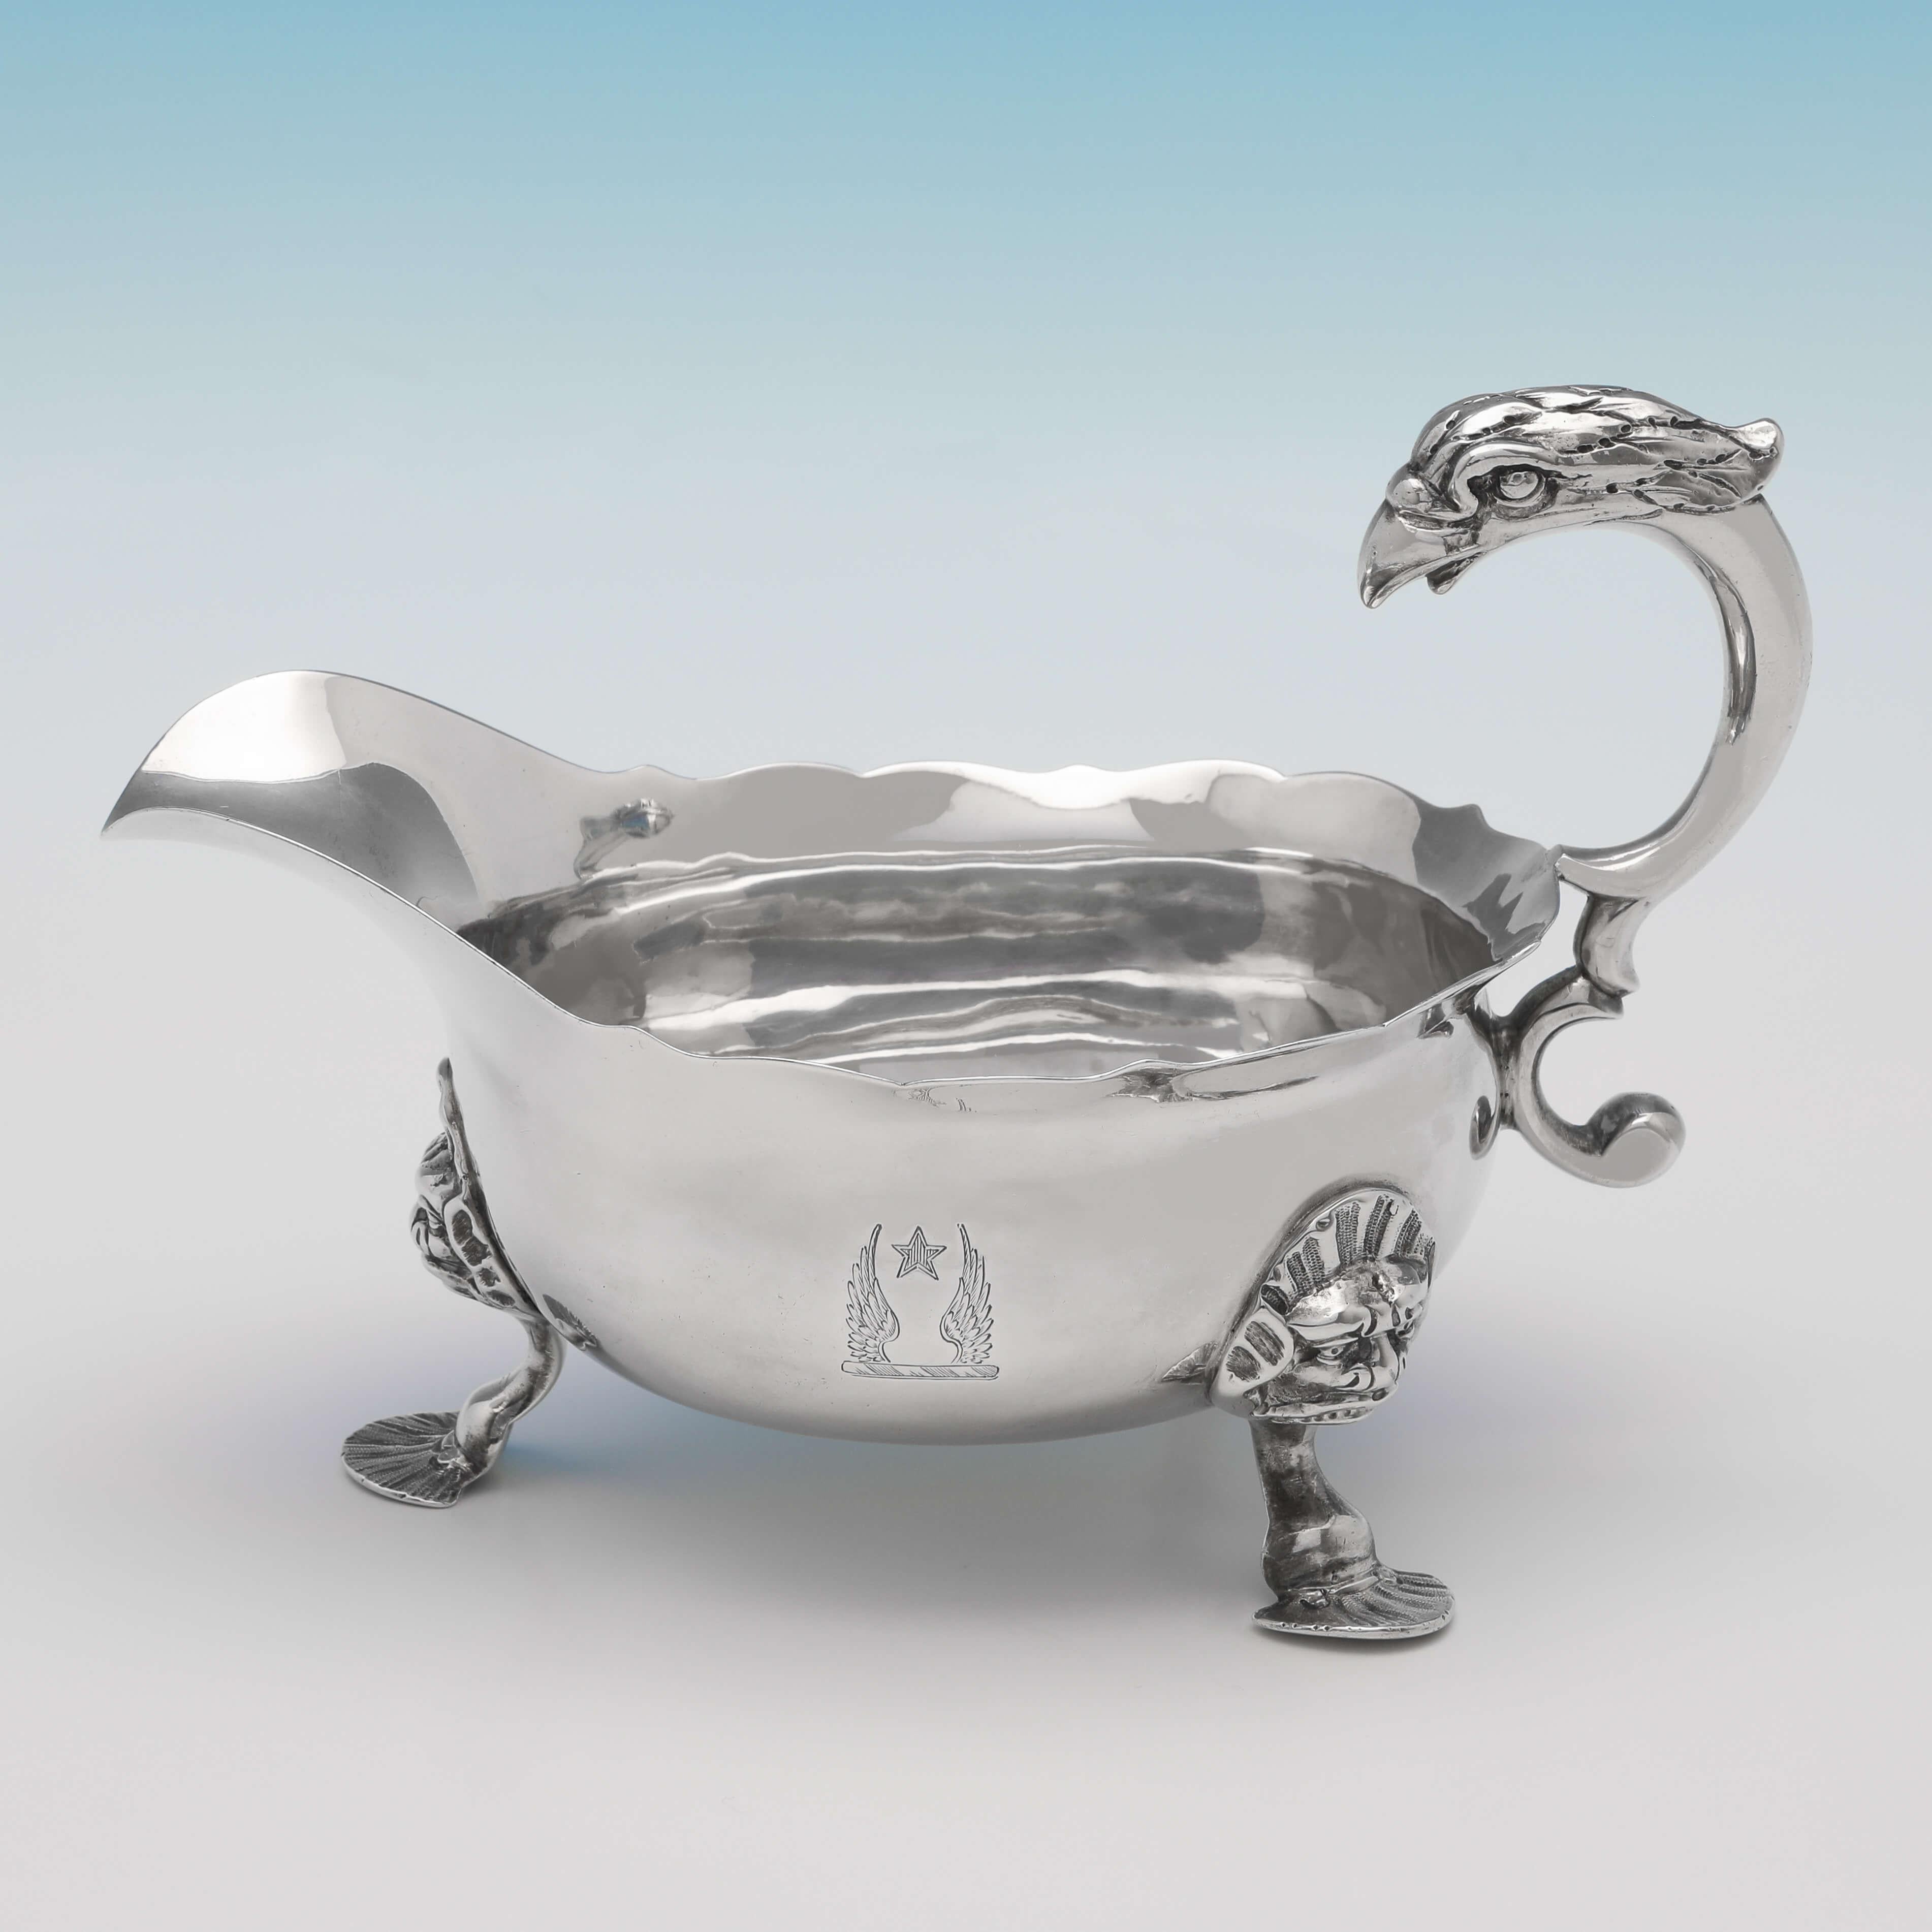 Hallmarked in London in 1748 by John Pollock, this striking pair of George II, antique sterling silver sauce boats, feature shaped borders, eagle head decorated handles, and engraved crests to both sides. Each sauce boat measures 4.75